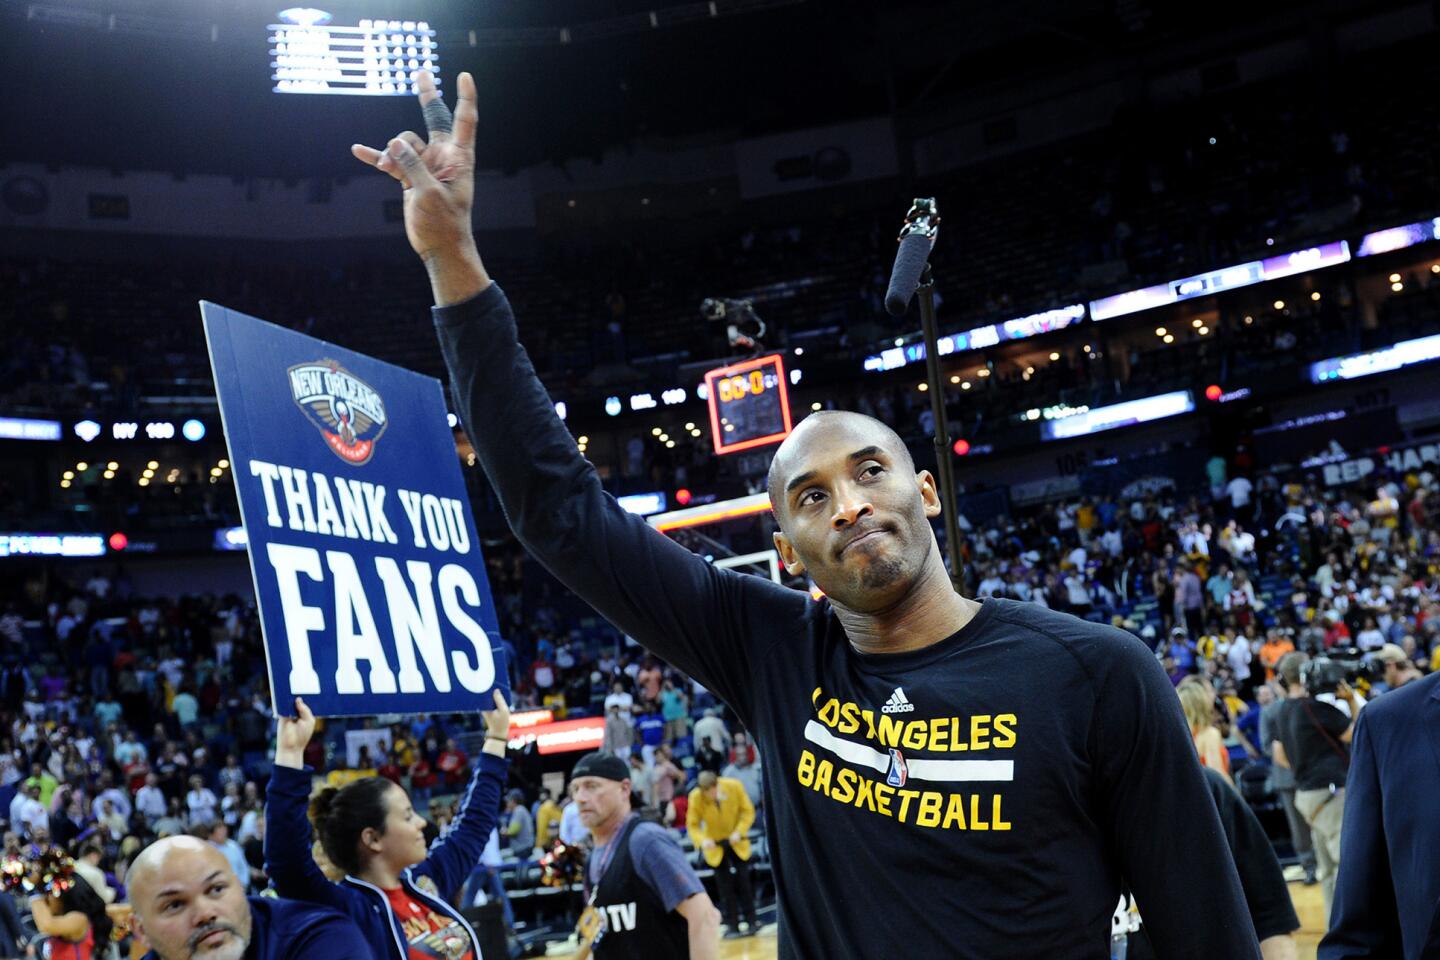 Kobe Bryant waves goodbye to fans as the Lakers leave the court following their loss to the Pelicans in the future Hall-of-Famers final game in New Orleans.